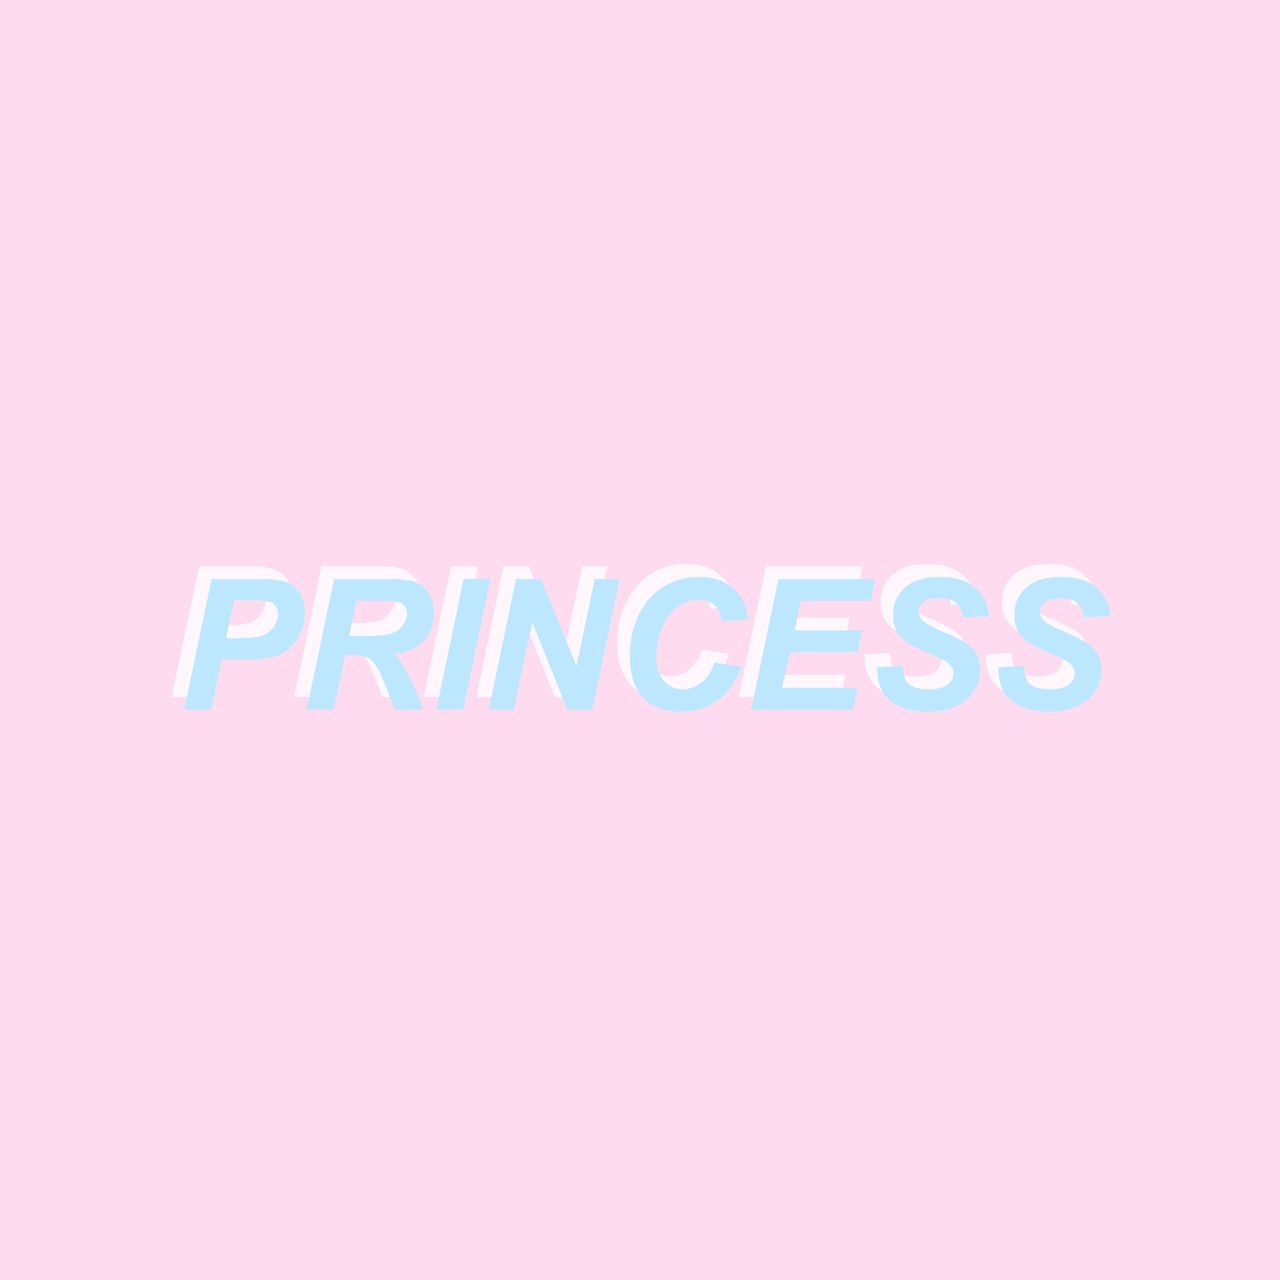 The word princess in baby blue and pink - Princess, baby